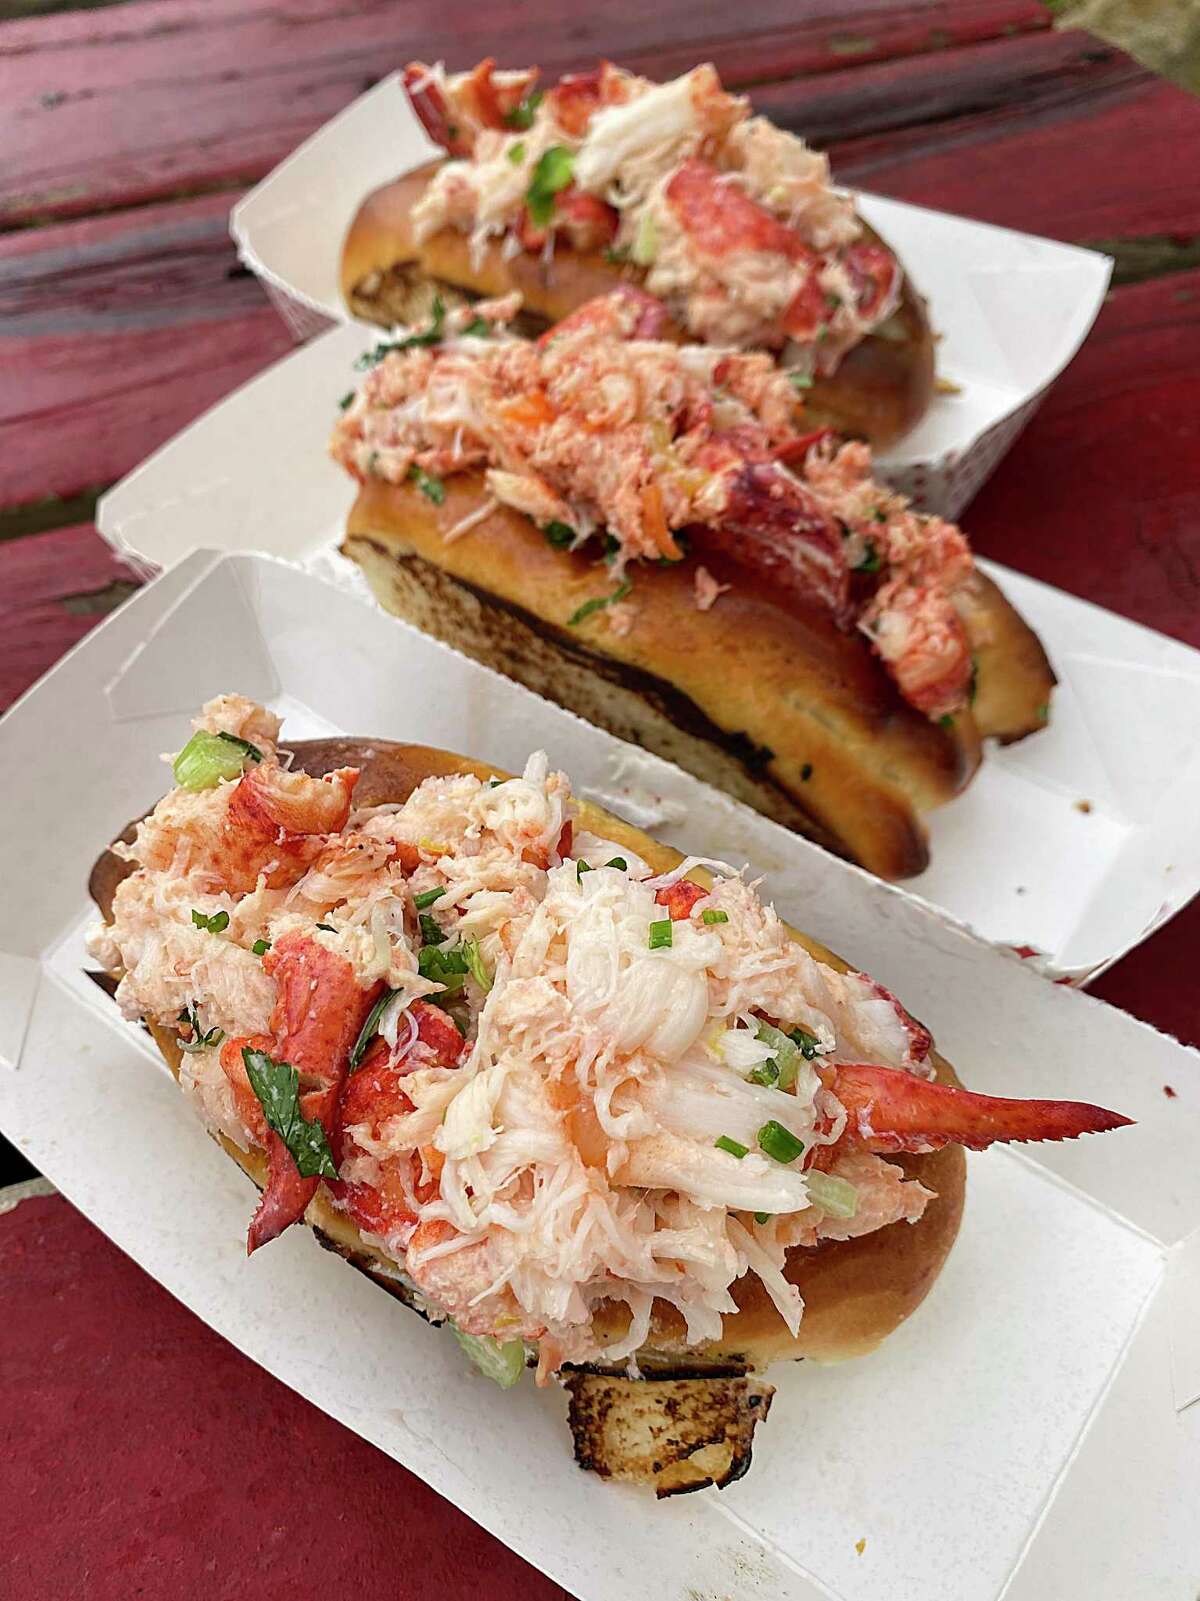 Lobster roll choices include, from the bottom, Maine Style (mayo, celery, tarragon), Island Breeze (mango, Scotch bonnet peppers) and St. Anthony (jalapeño, cilantro) at Masshole, a San Antonio food truck specializing in lobster rolls.